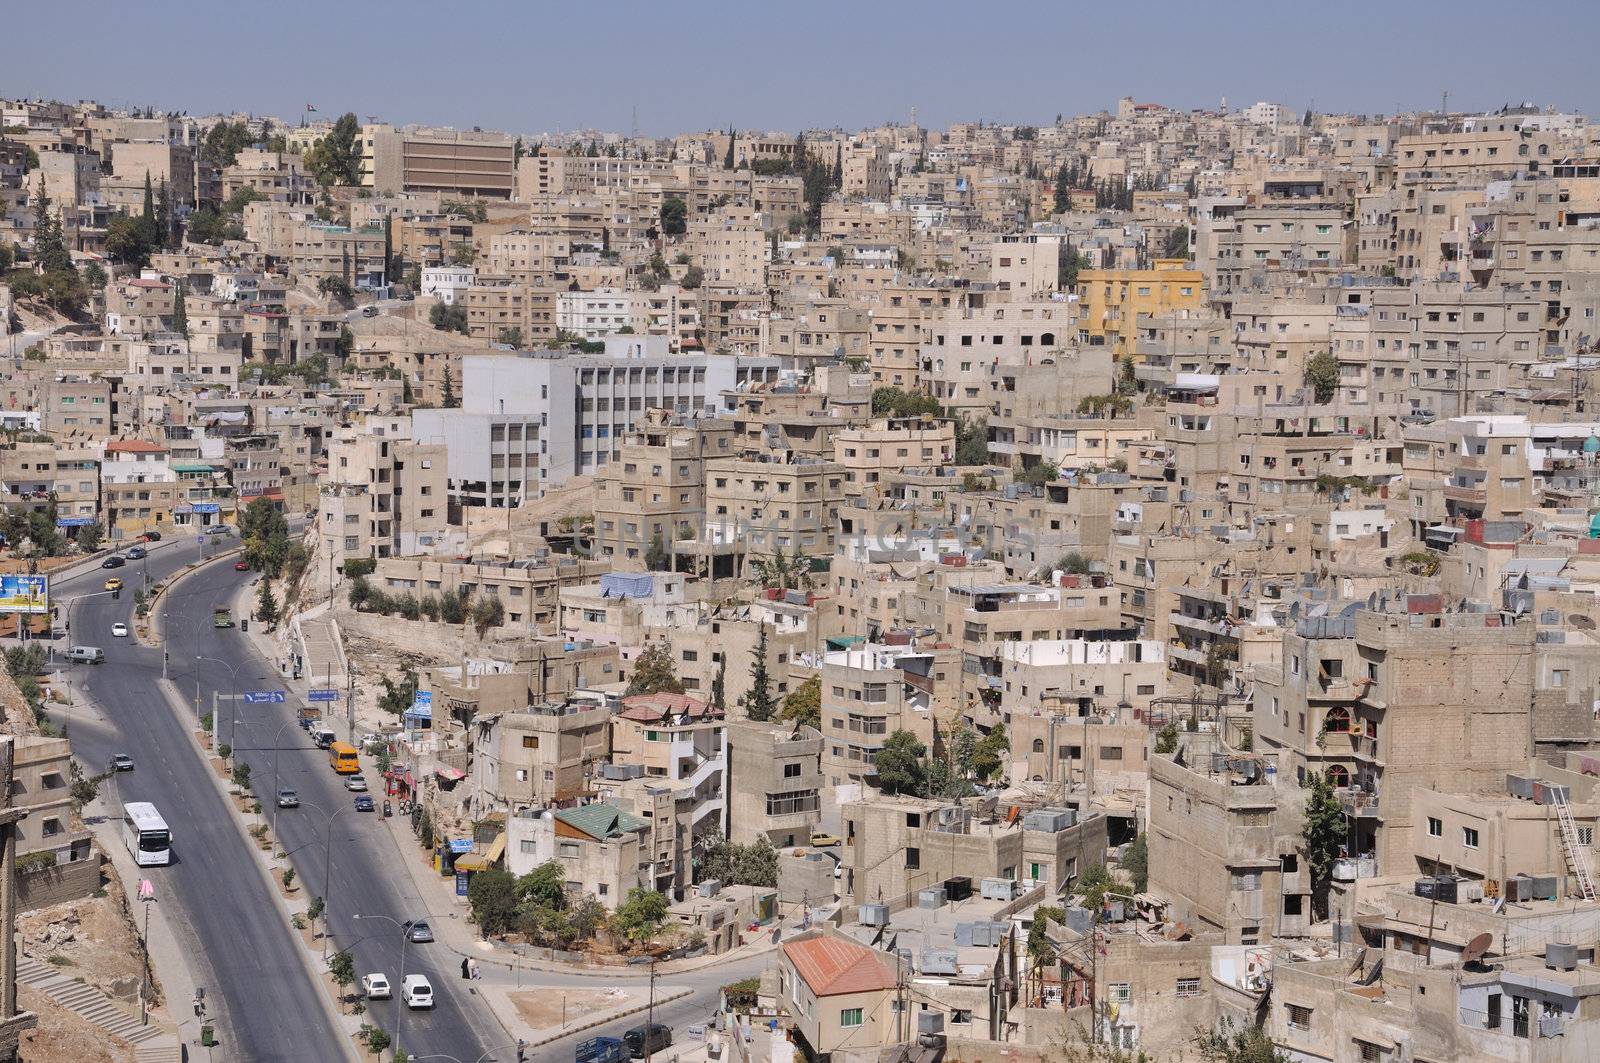 Amman - country's political, cultural and commercial centre and one of the oldest continuously inhabited cities in the world.